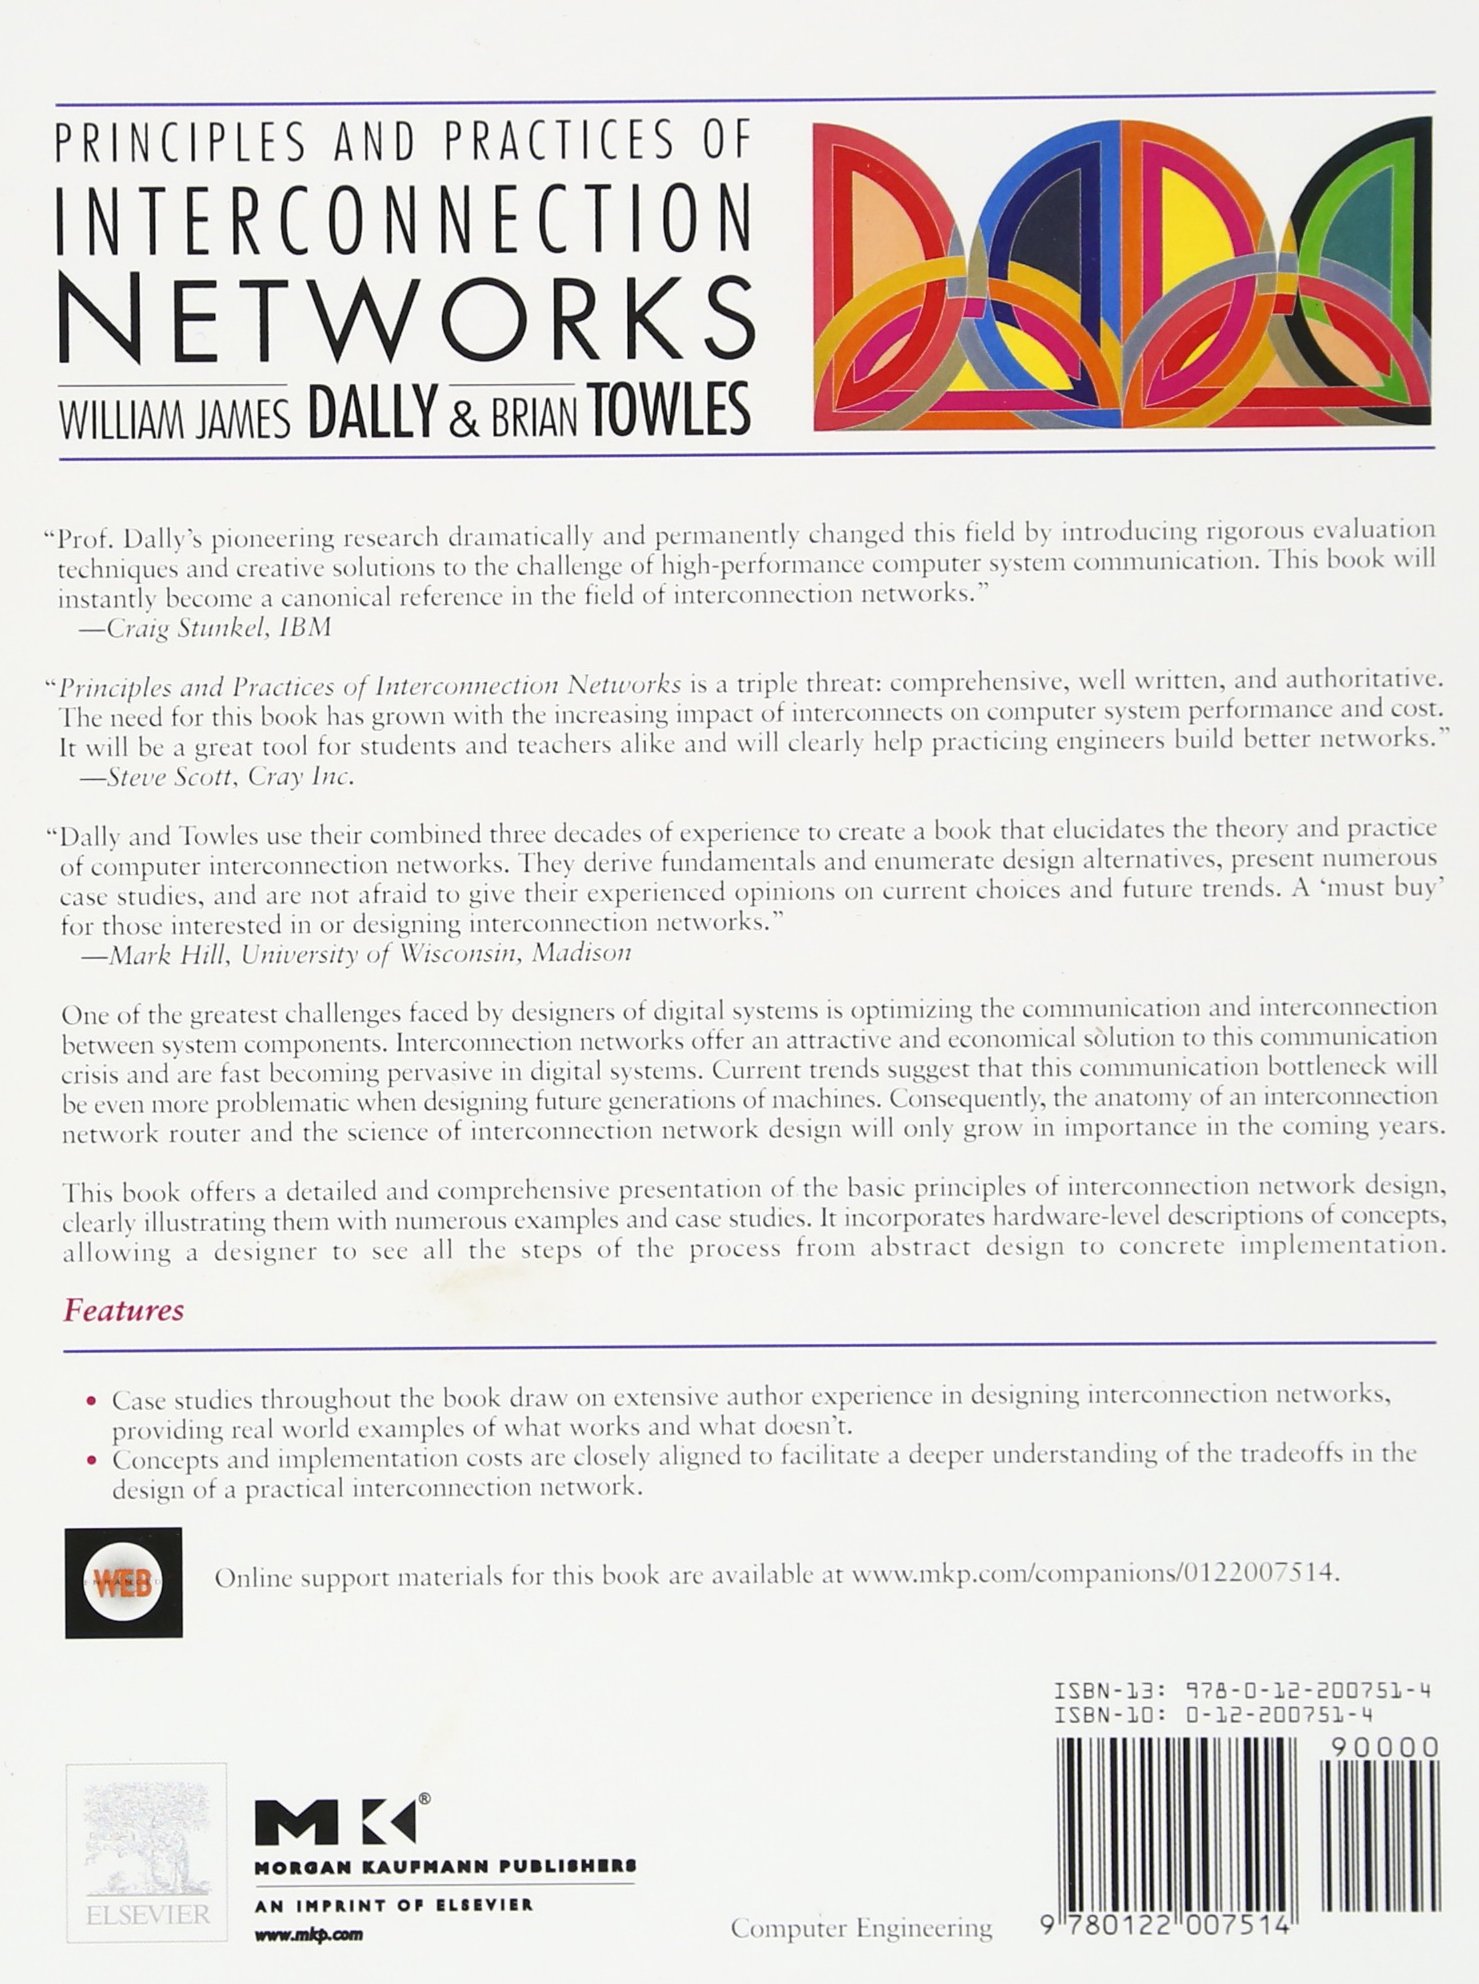 Principles and Practices of Interconnection Networks (The Morgan Kaufmann Series in Computer Architecture and Design)